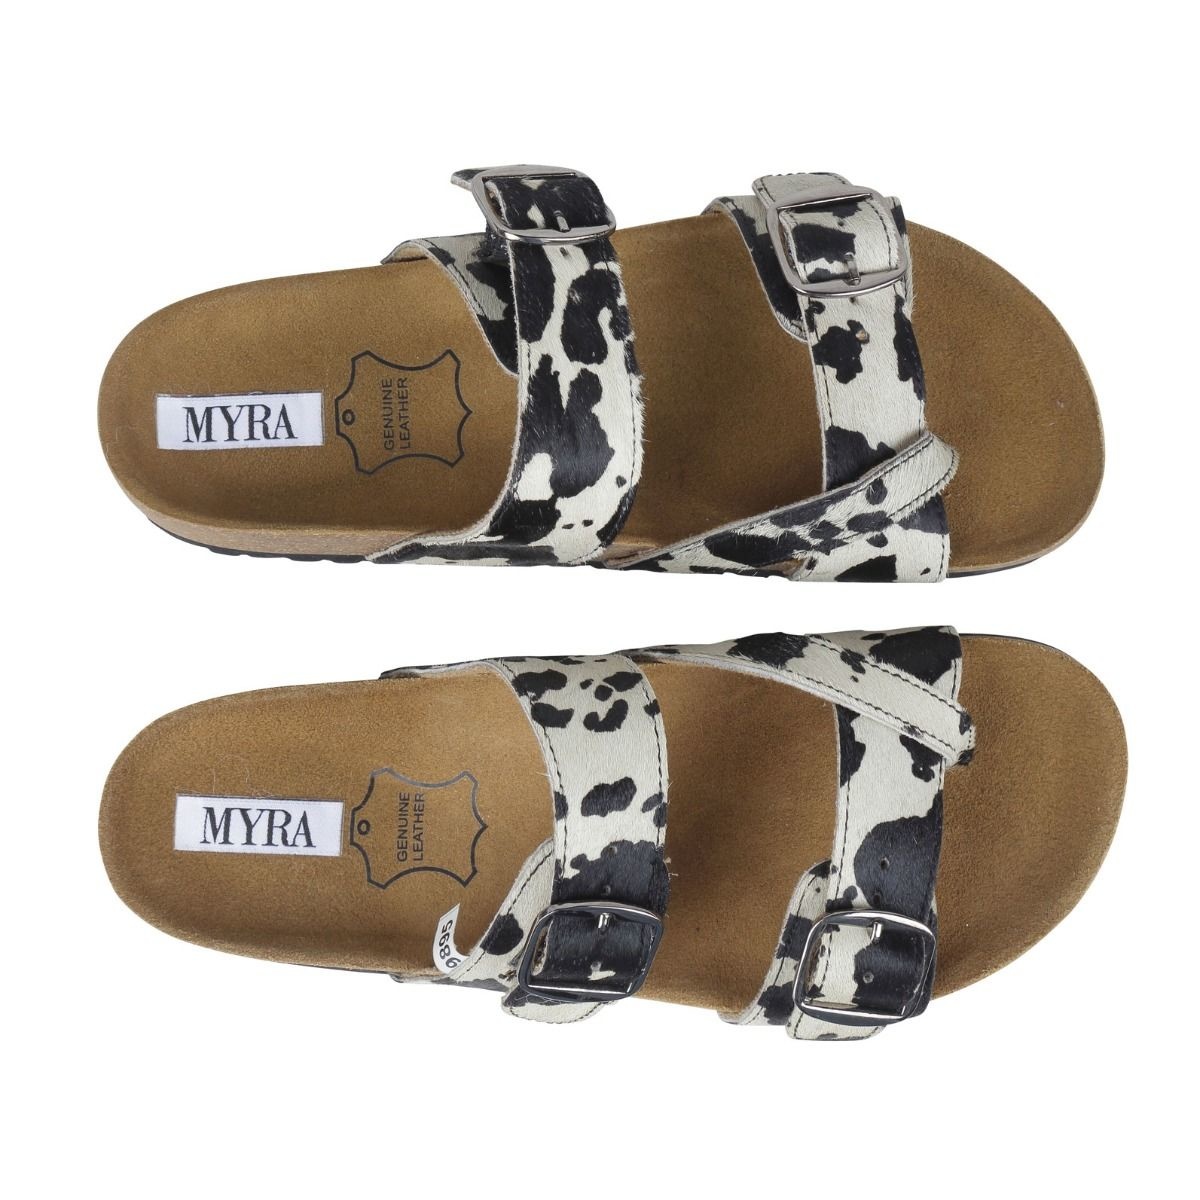 Myra Shoes and Sandals